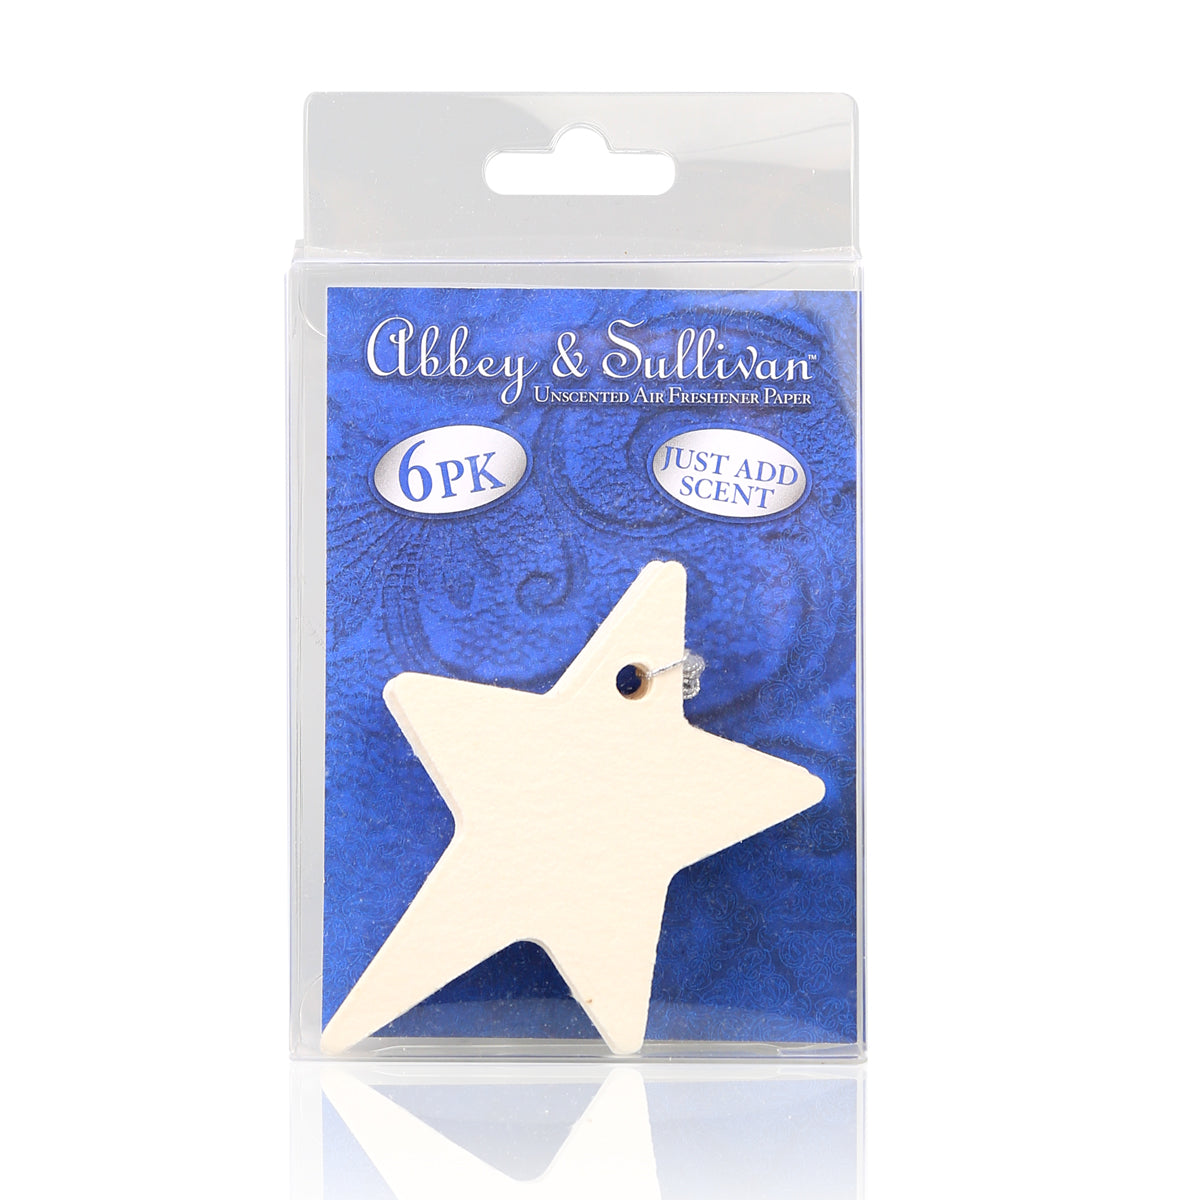 Unscented Air Freshener Paper Shapes - 6 PK